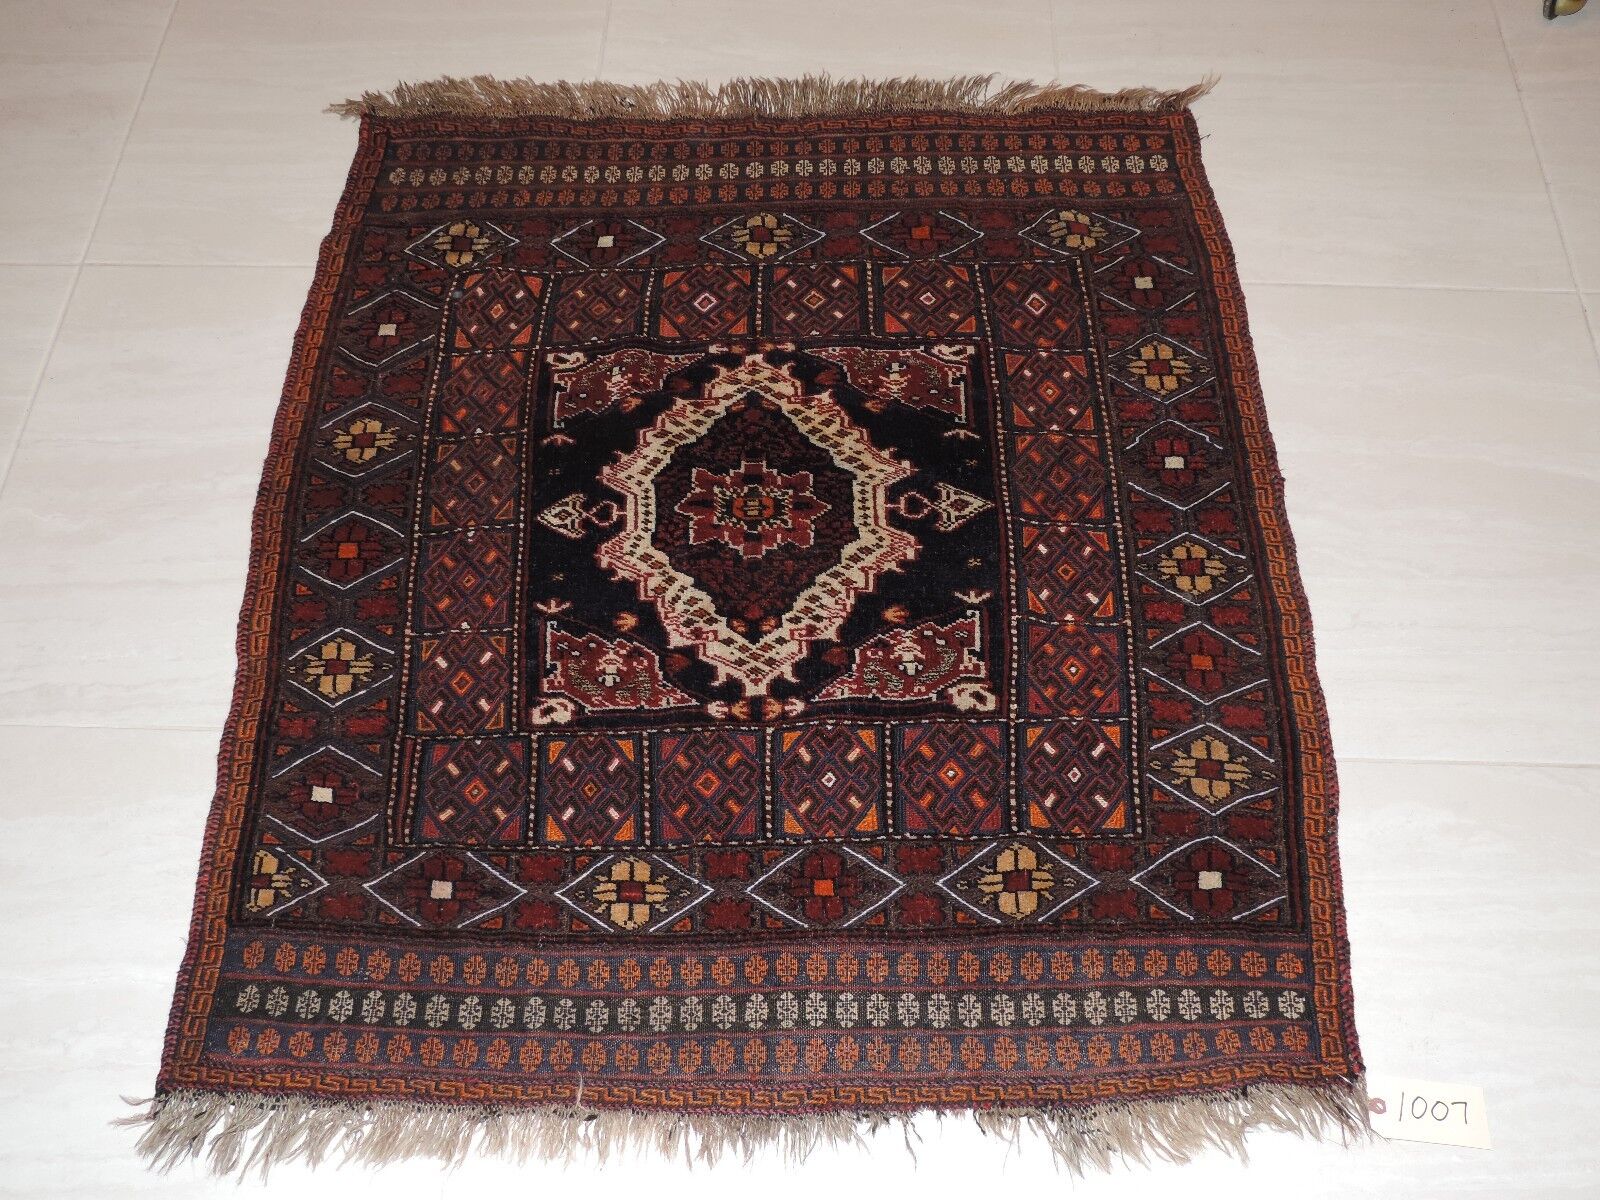 4ft. Almost Square Antique Turkish Handwoven Wool Throw Rug 